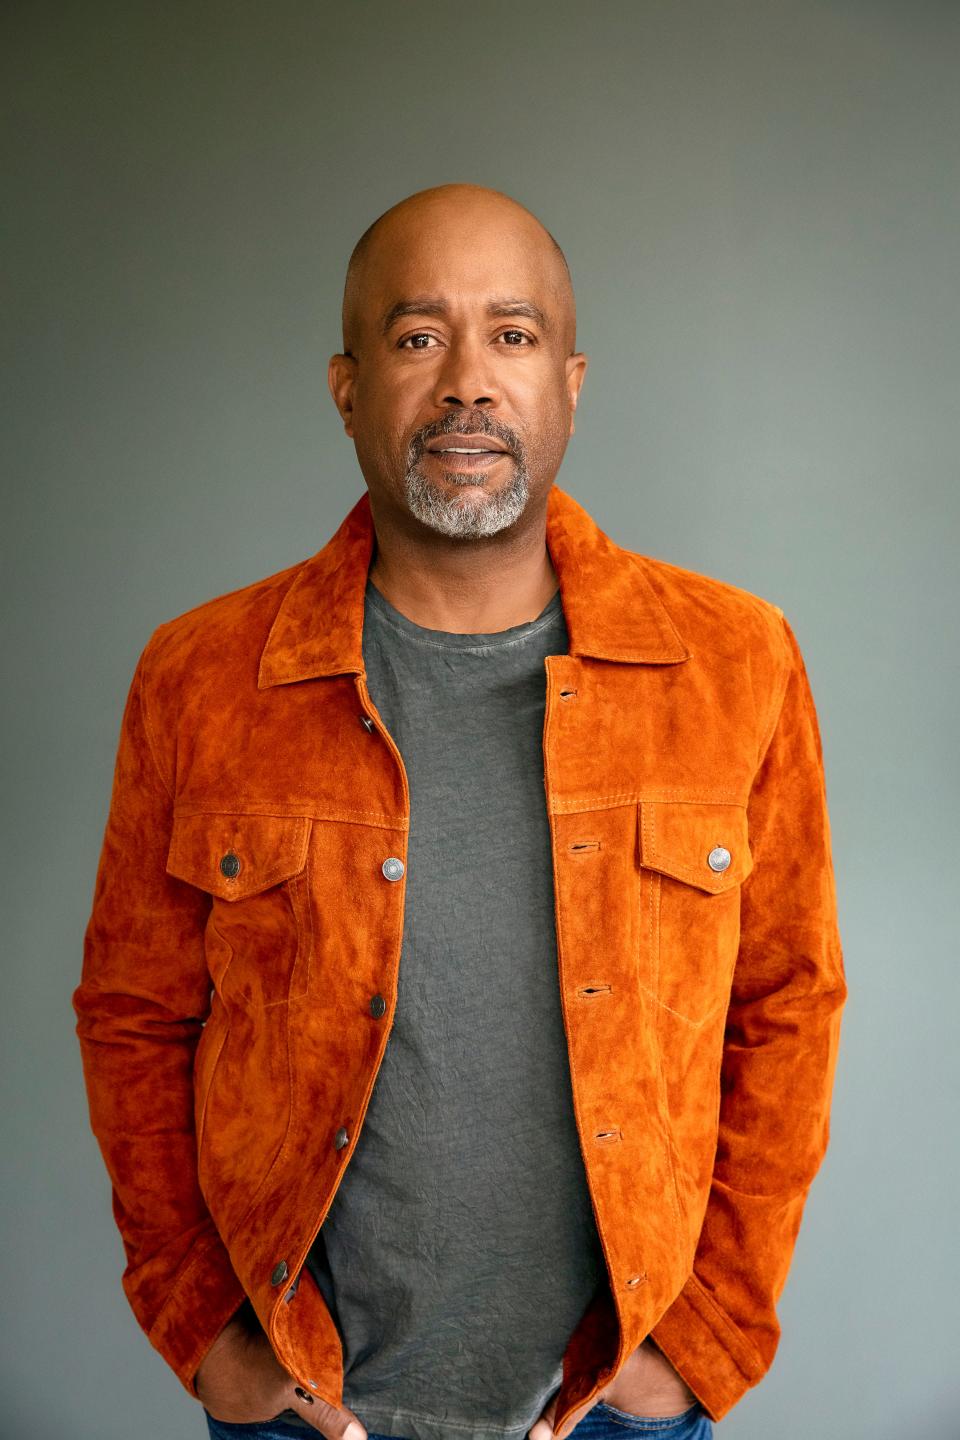 Darius Rucker and his Hootie & the Blowfish cohorts are returning to the road with their Summer Camp with Trucks Tour, which will stop in Cincinnati on June 7.